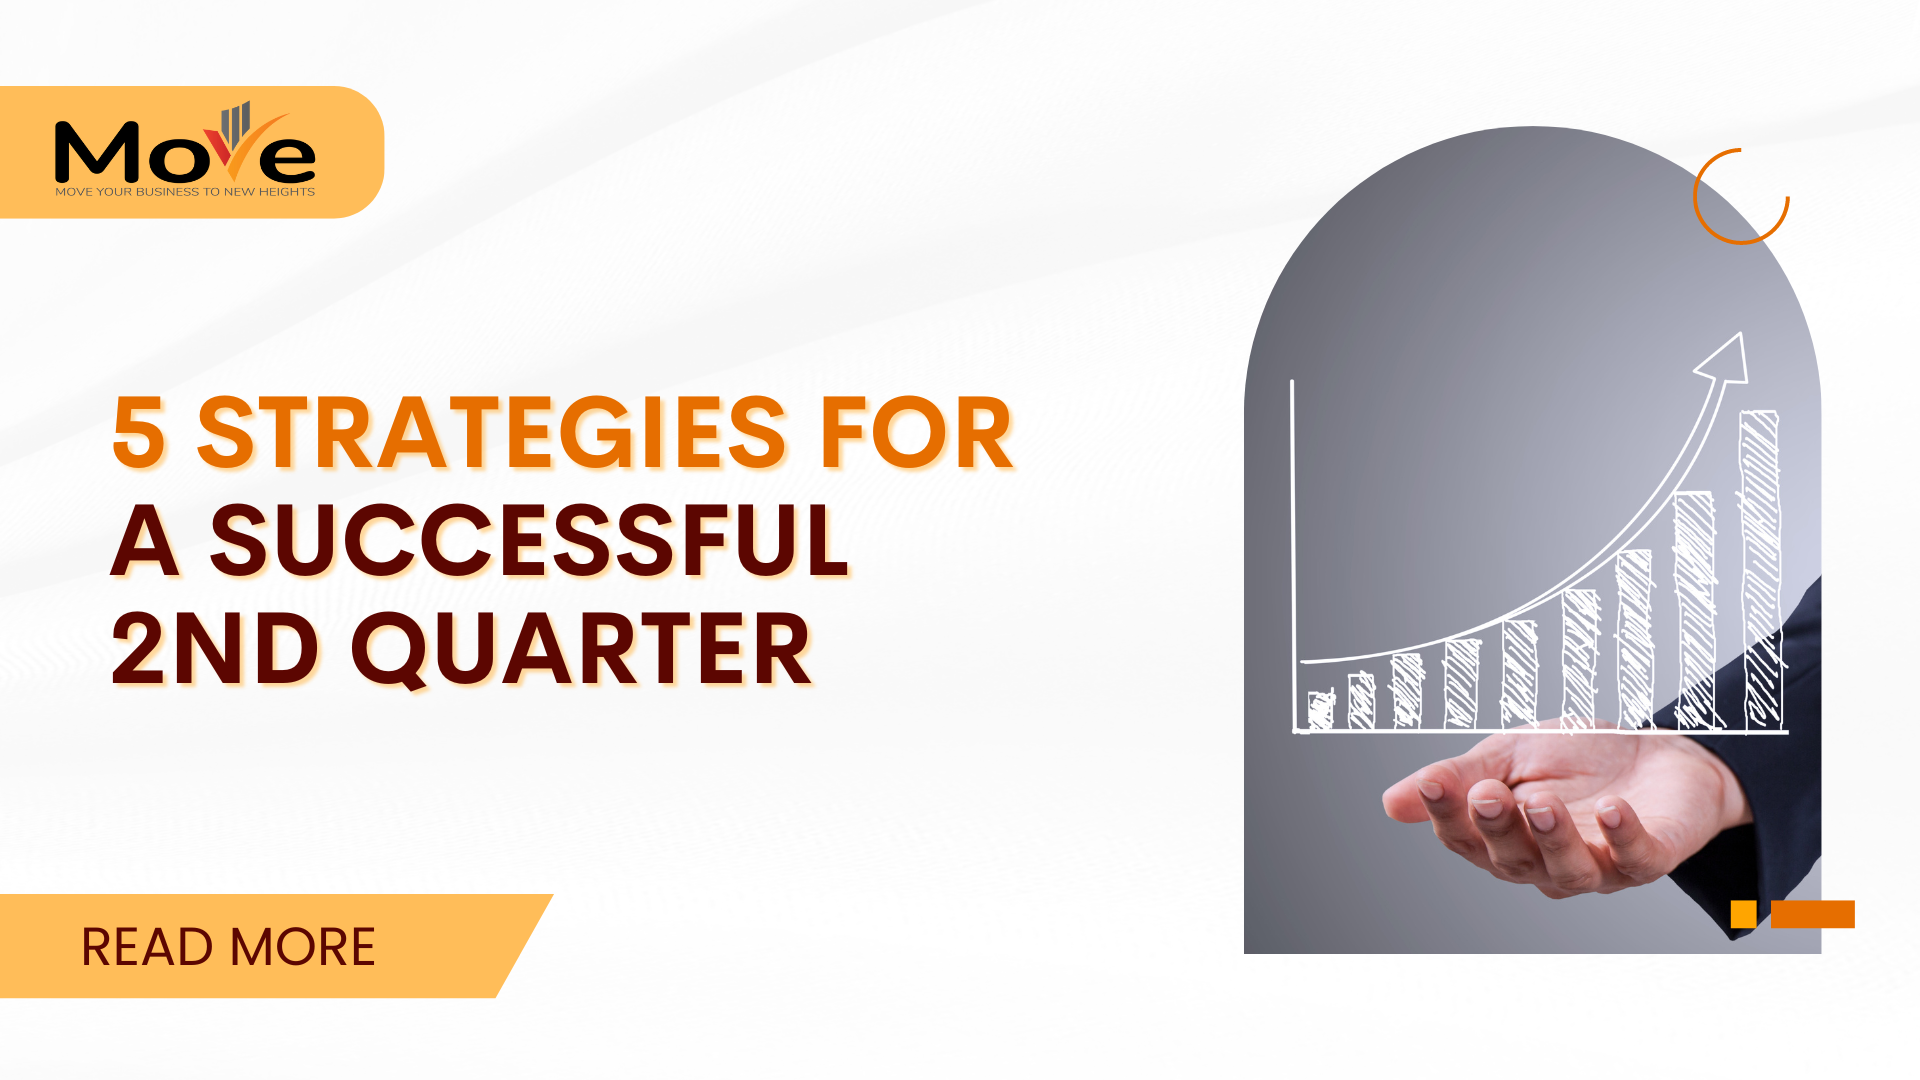 Strategies for a Successful 2nd Quarter